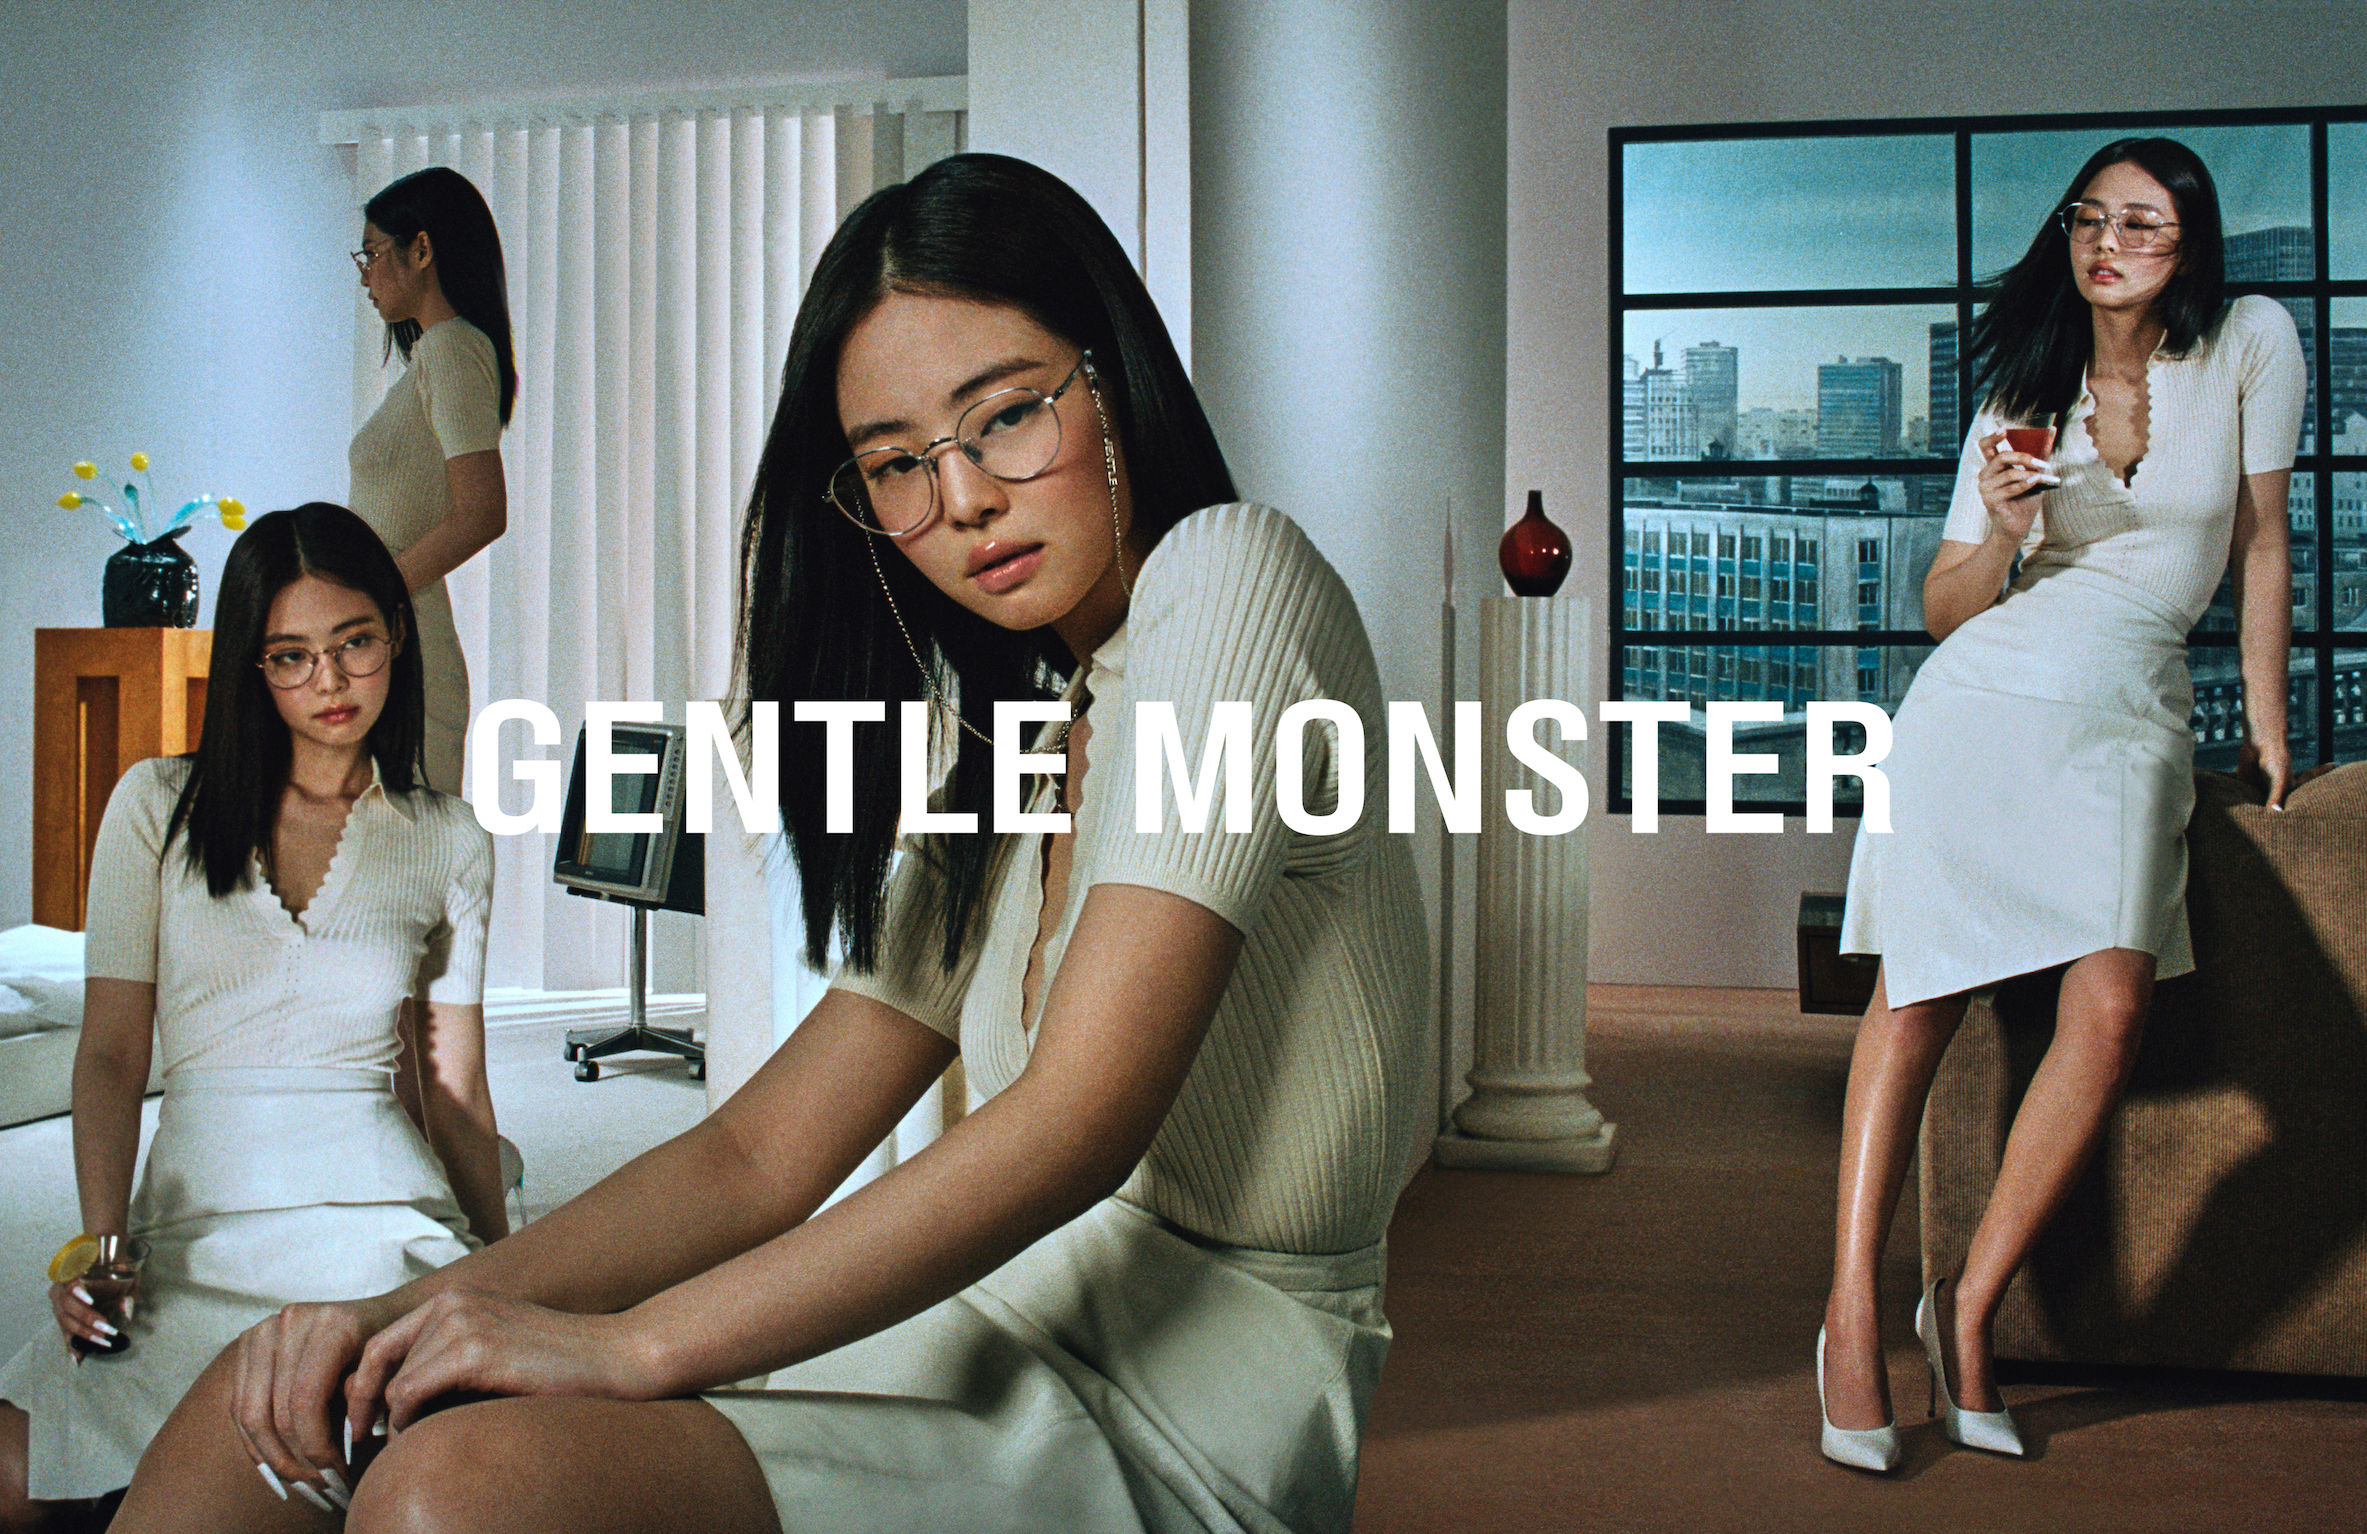 First look: Blackpink's Jennie x Gentle Monster sunglasses collection